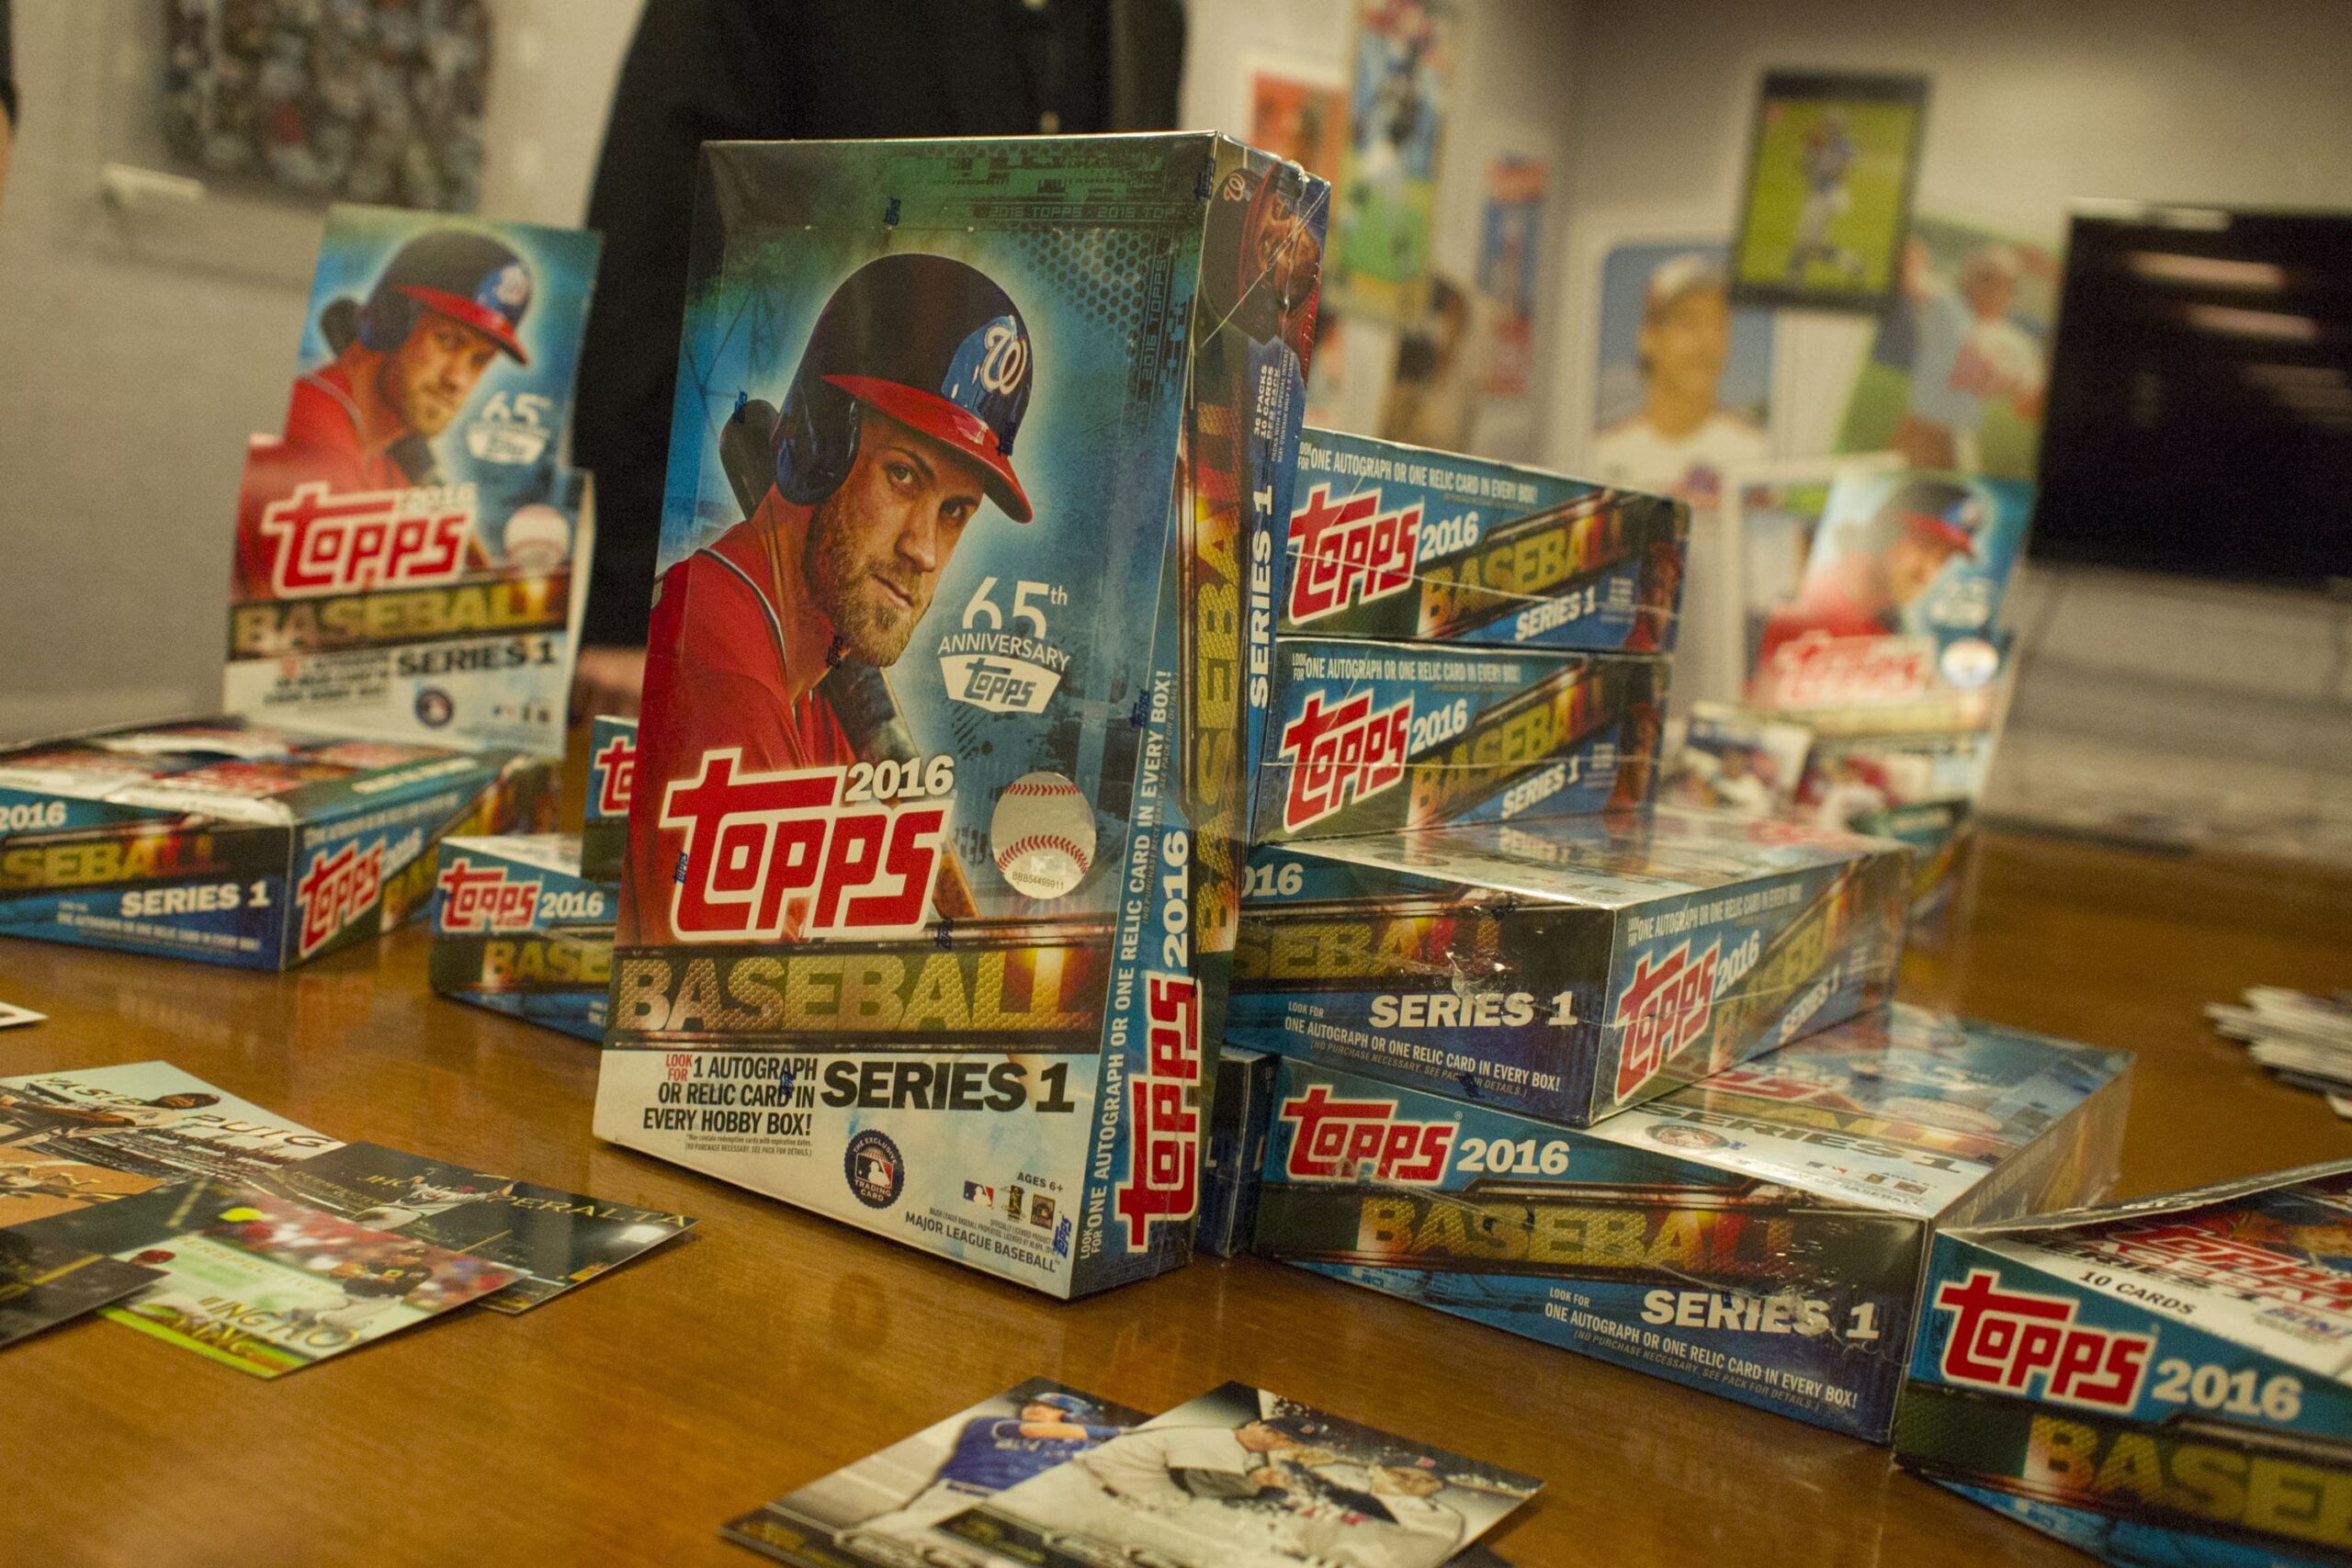 Topps SPAC merger with Mudrick dies due to MLB buying and selling card deal